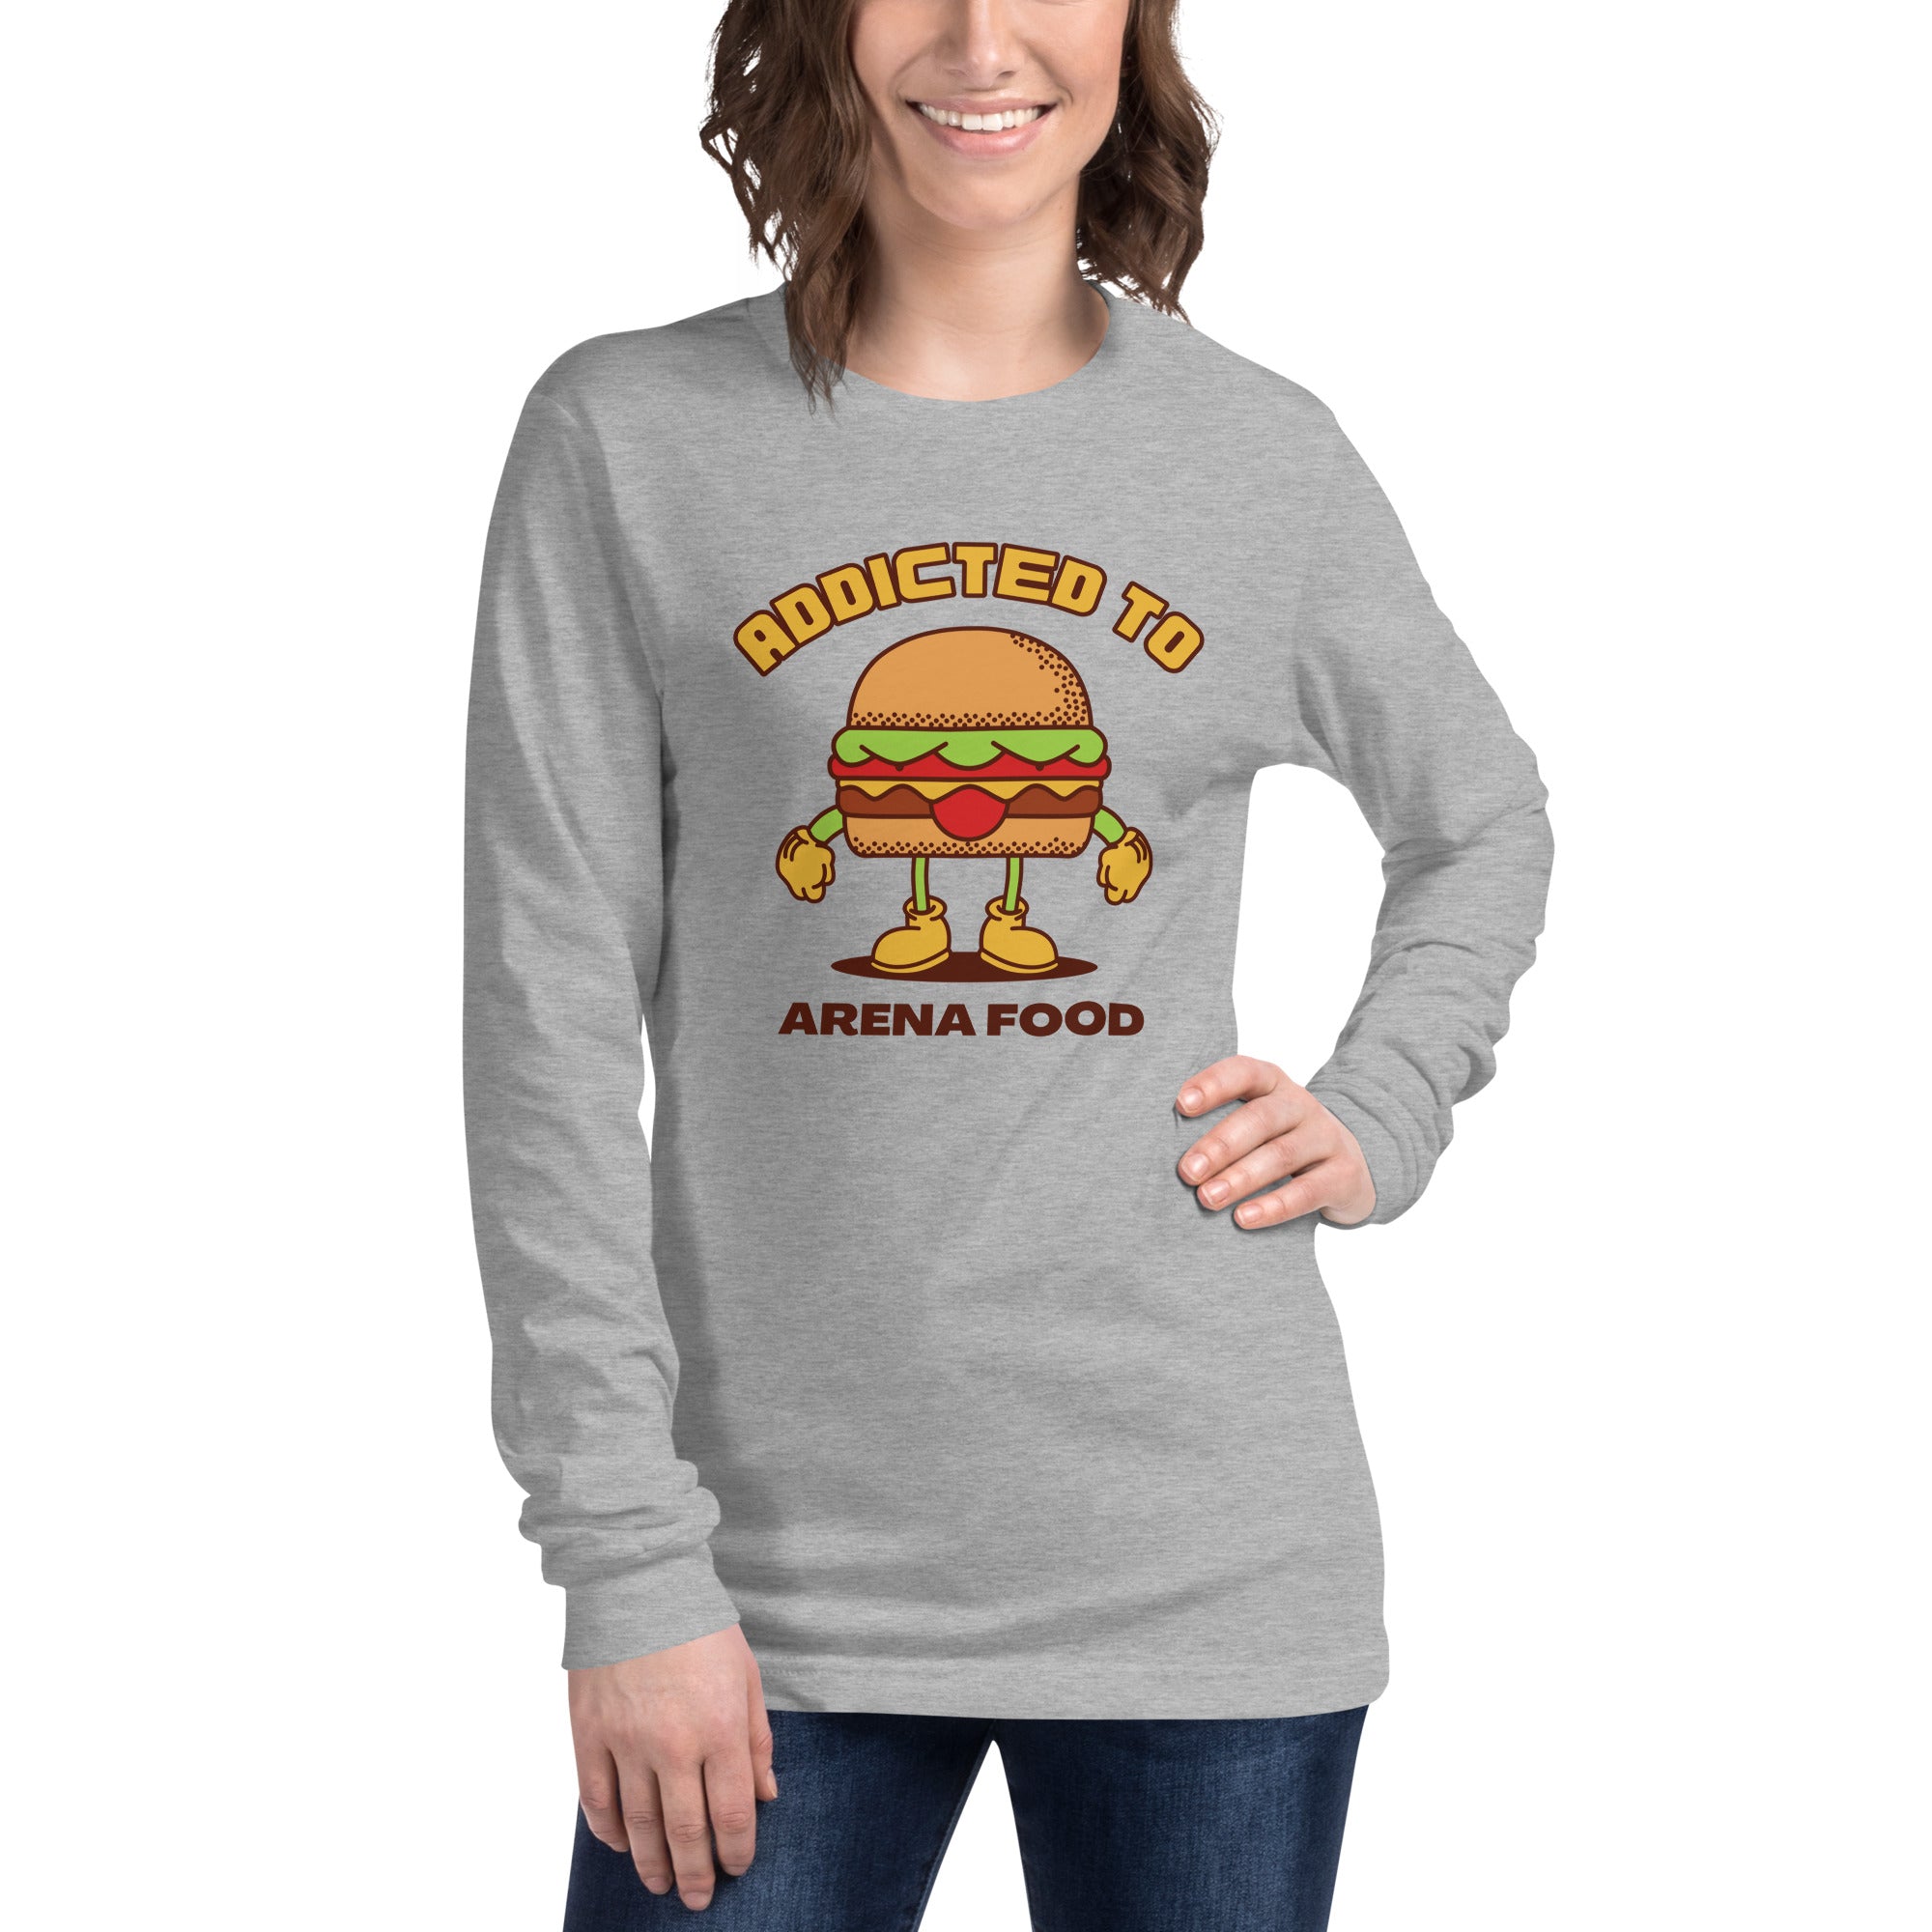 Addicted To Arena Food Women's Pro Team Long Sleeve